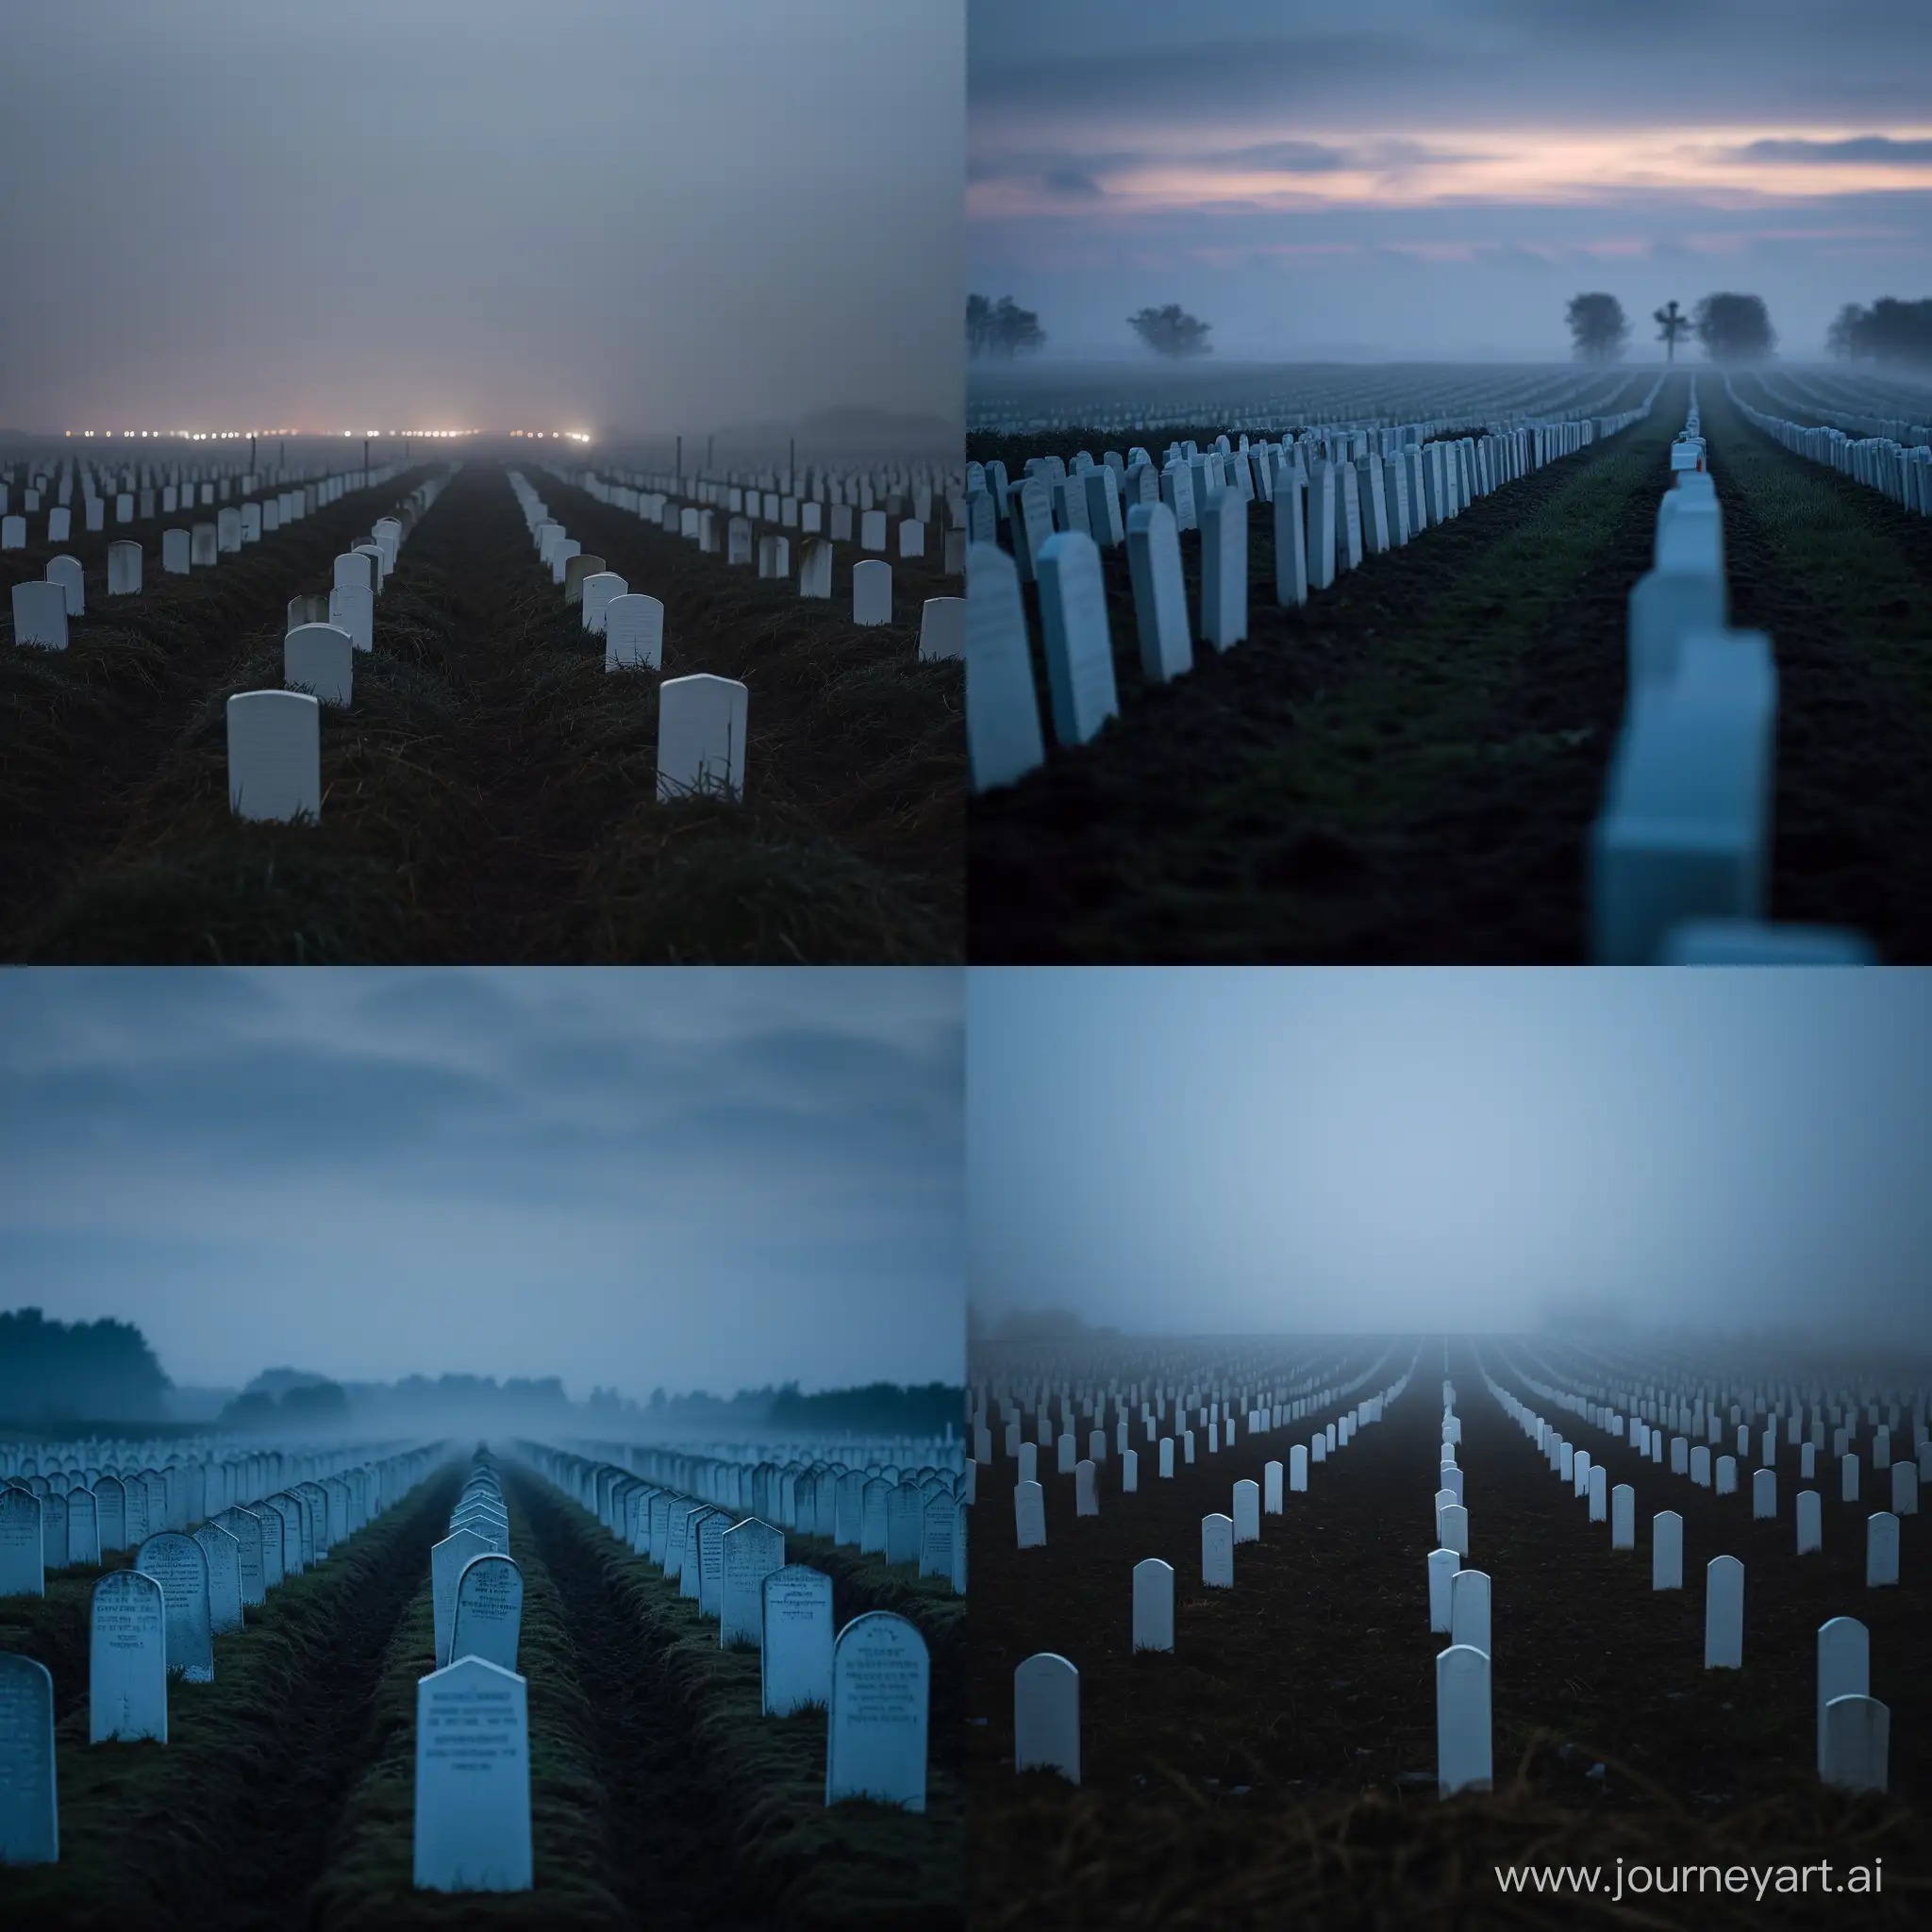 A foggy Flanders Fields at dusk, rows of simple white grave markers emerging from the mist as night falls on the silent landscape, Type of Image: Photograph, Camera: Canon 5D Mark IV, Lens: 70-200mm f2.8L IS II USM, Shot: Mid-shot taking in the field of remembrance.